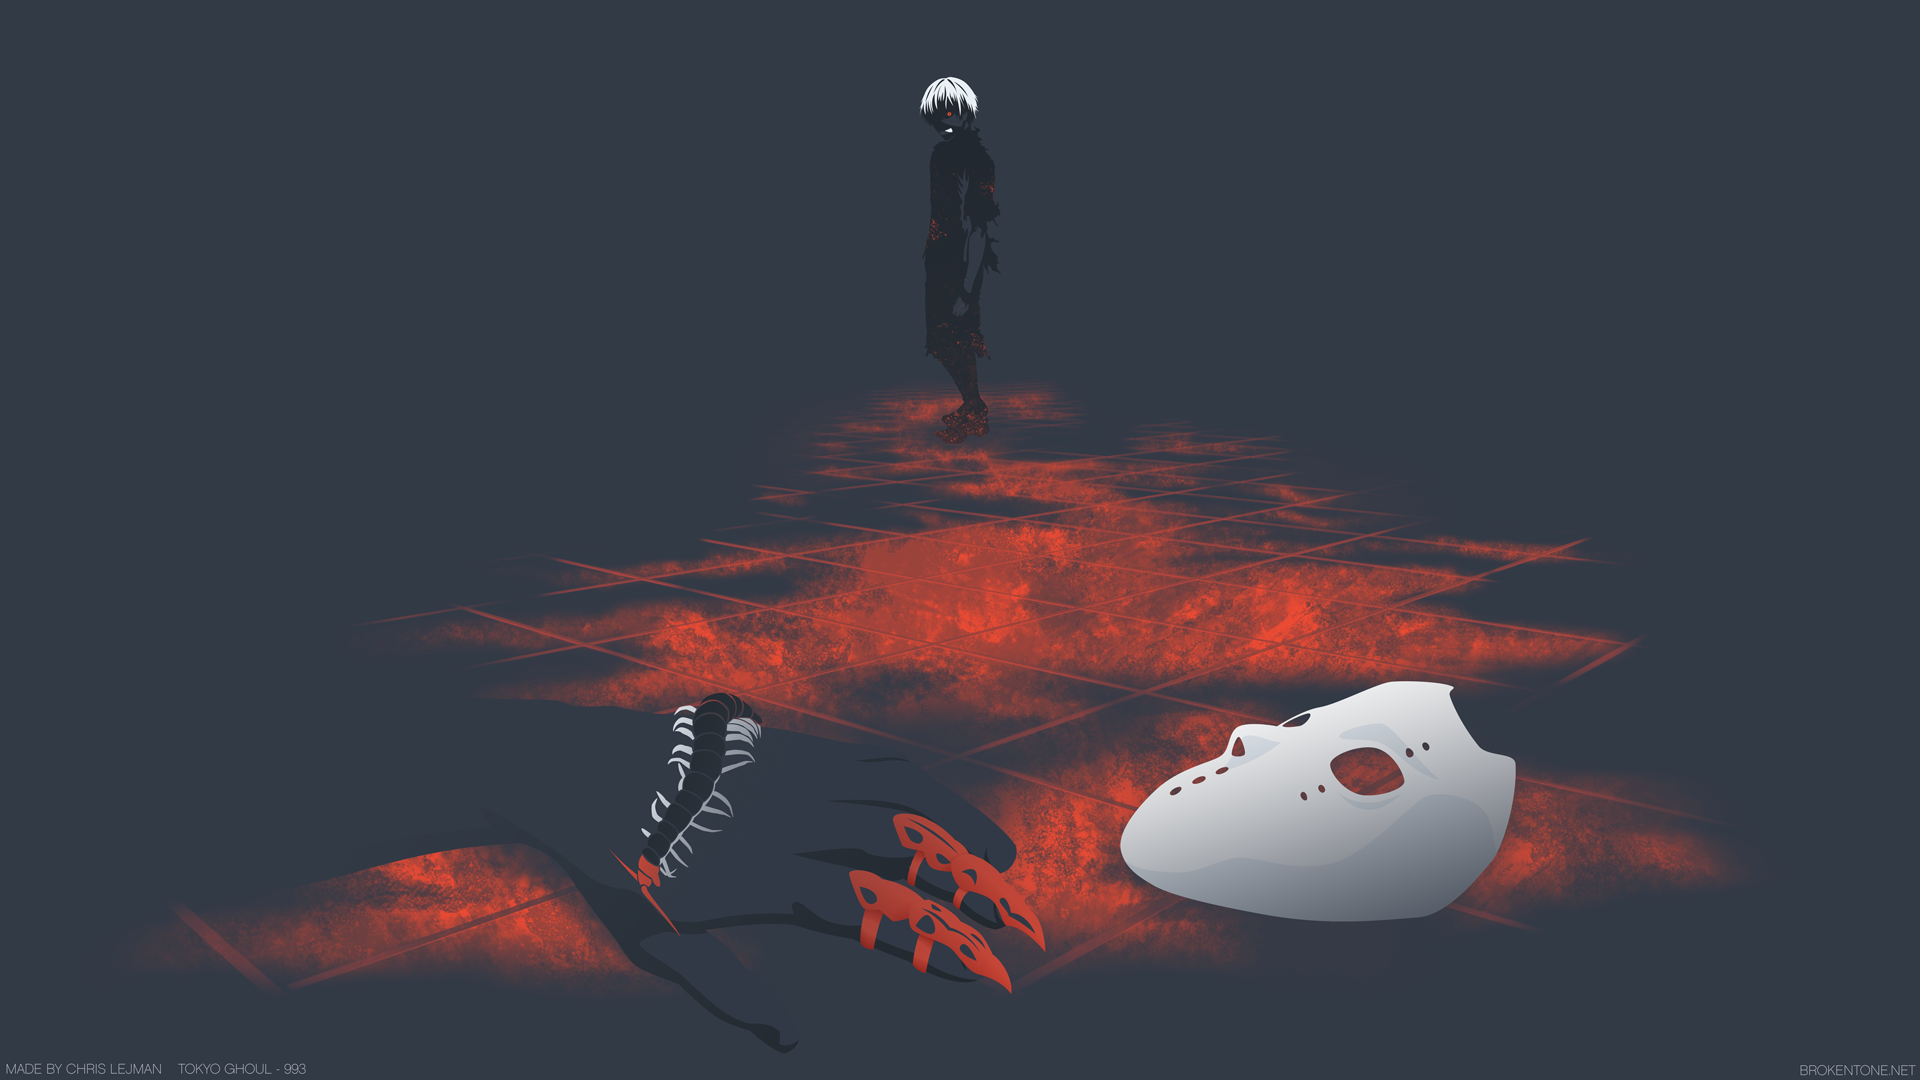 Tokyo Ghoul HD Wallpaper Background